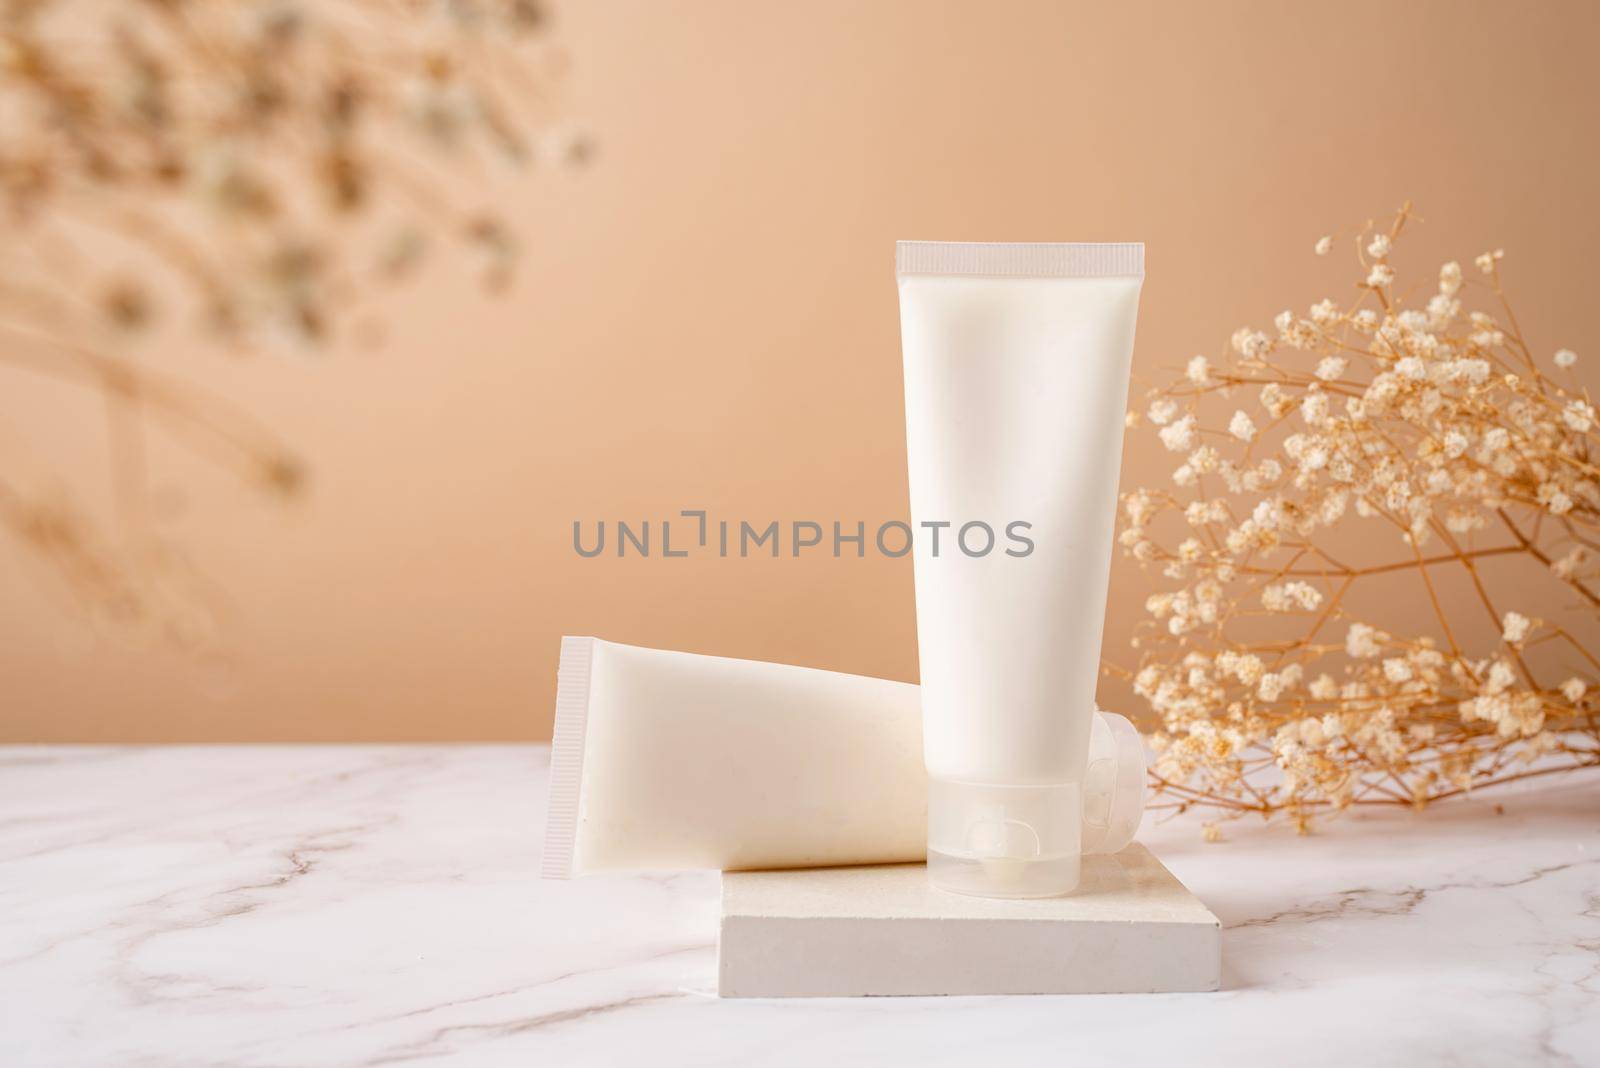 Cream tube mockup for branding presentation. Natural skincare beauty product on square white podium. Natural earthy colors, beige background